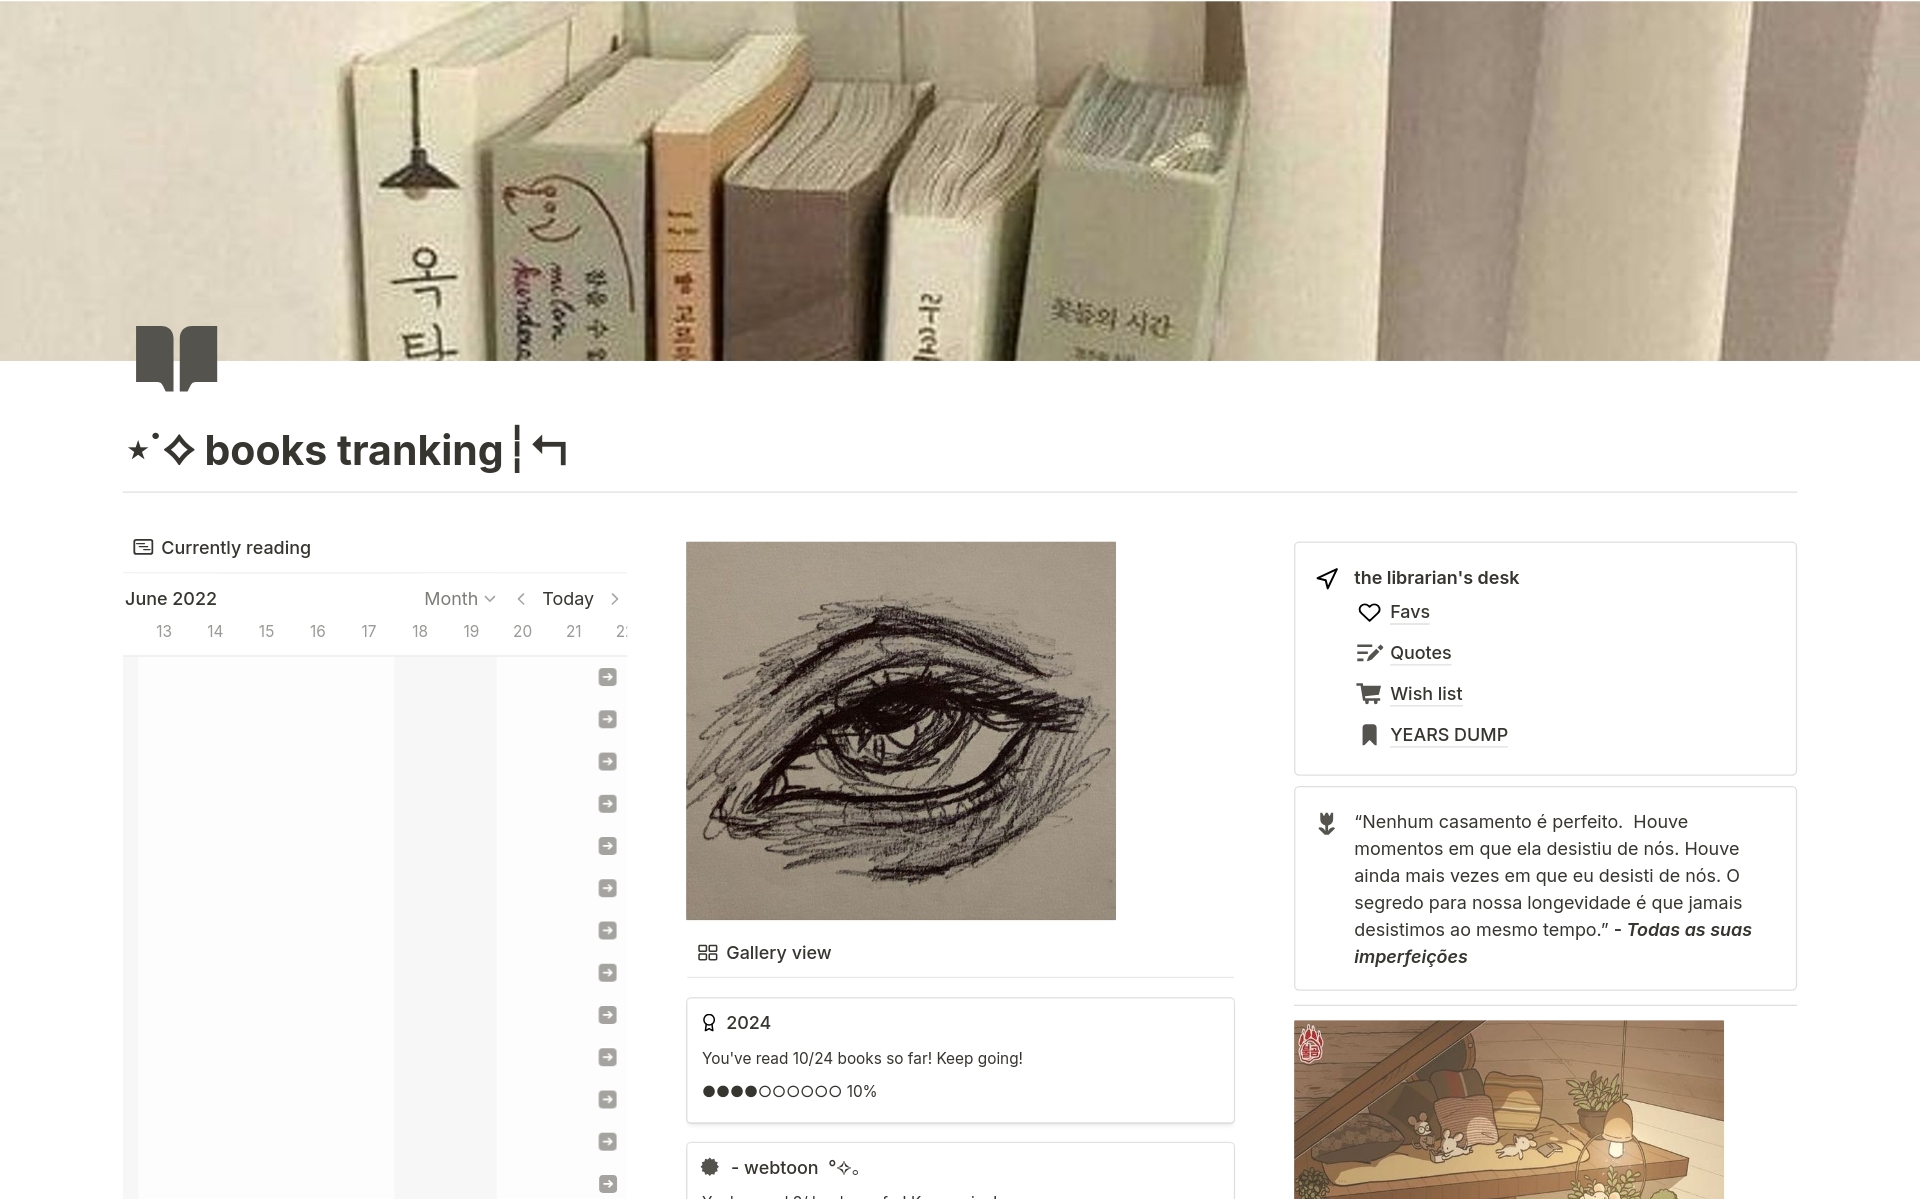 Aesthetically pleasing template that provides a visually engaging representation of your reading landscape. Easily add books, annotate with personal notes, and update your progress effortlessly.